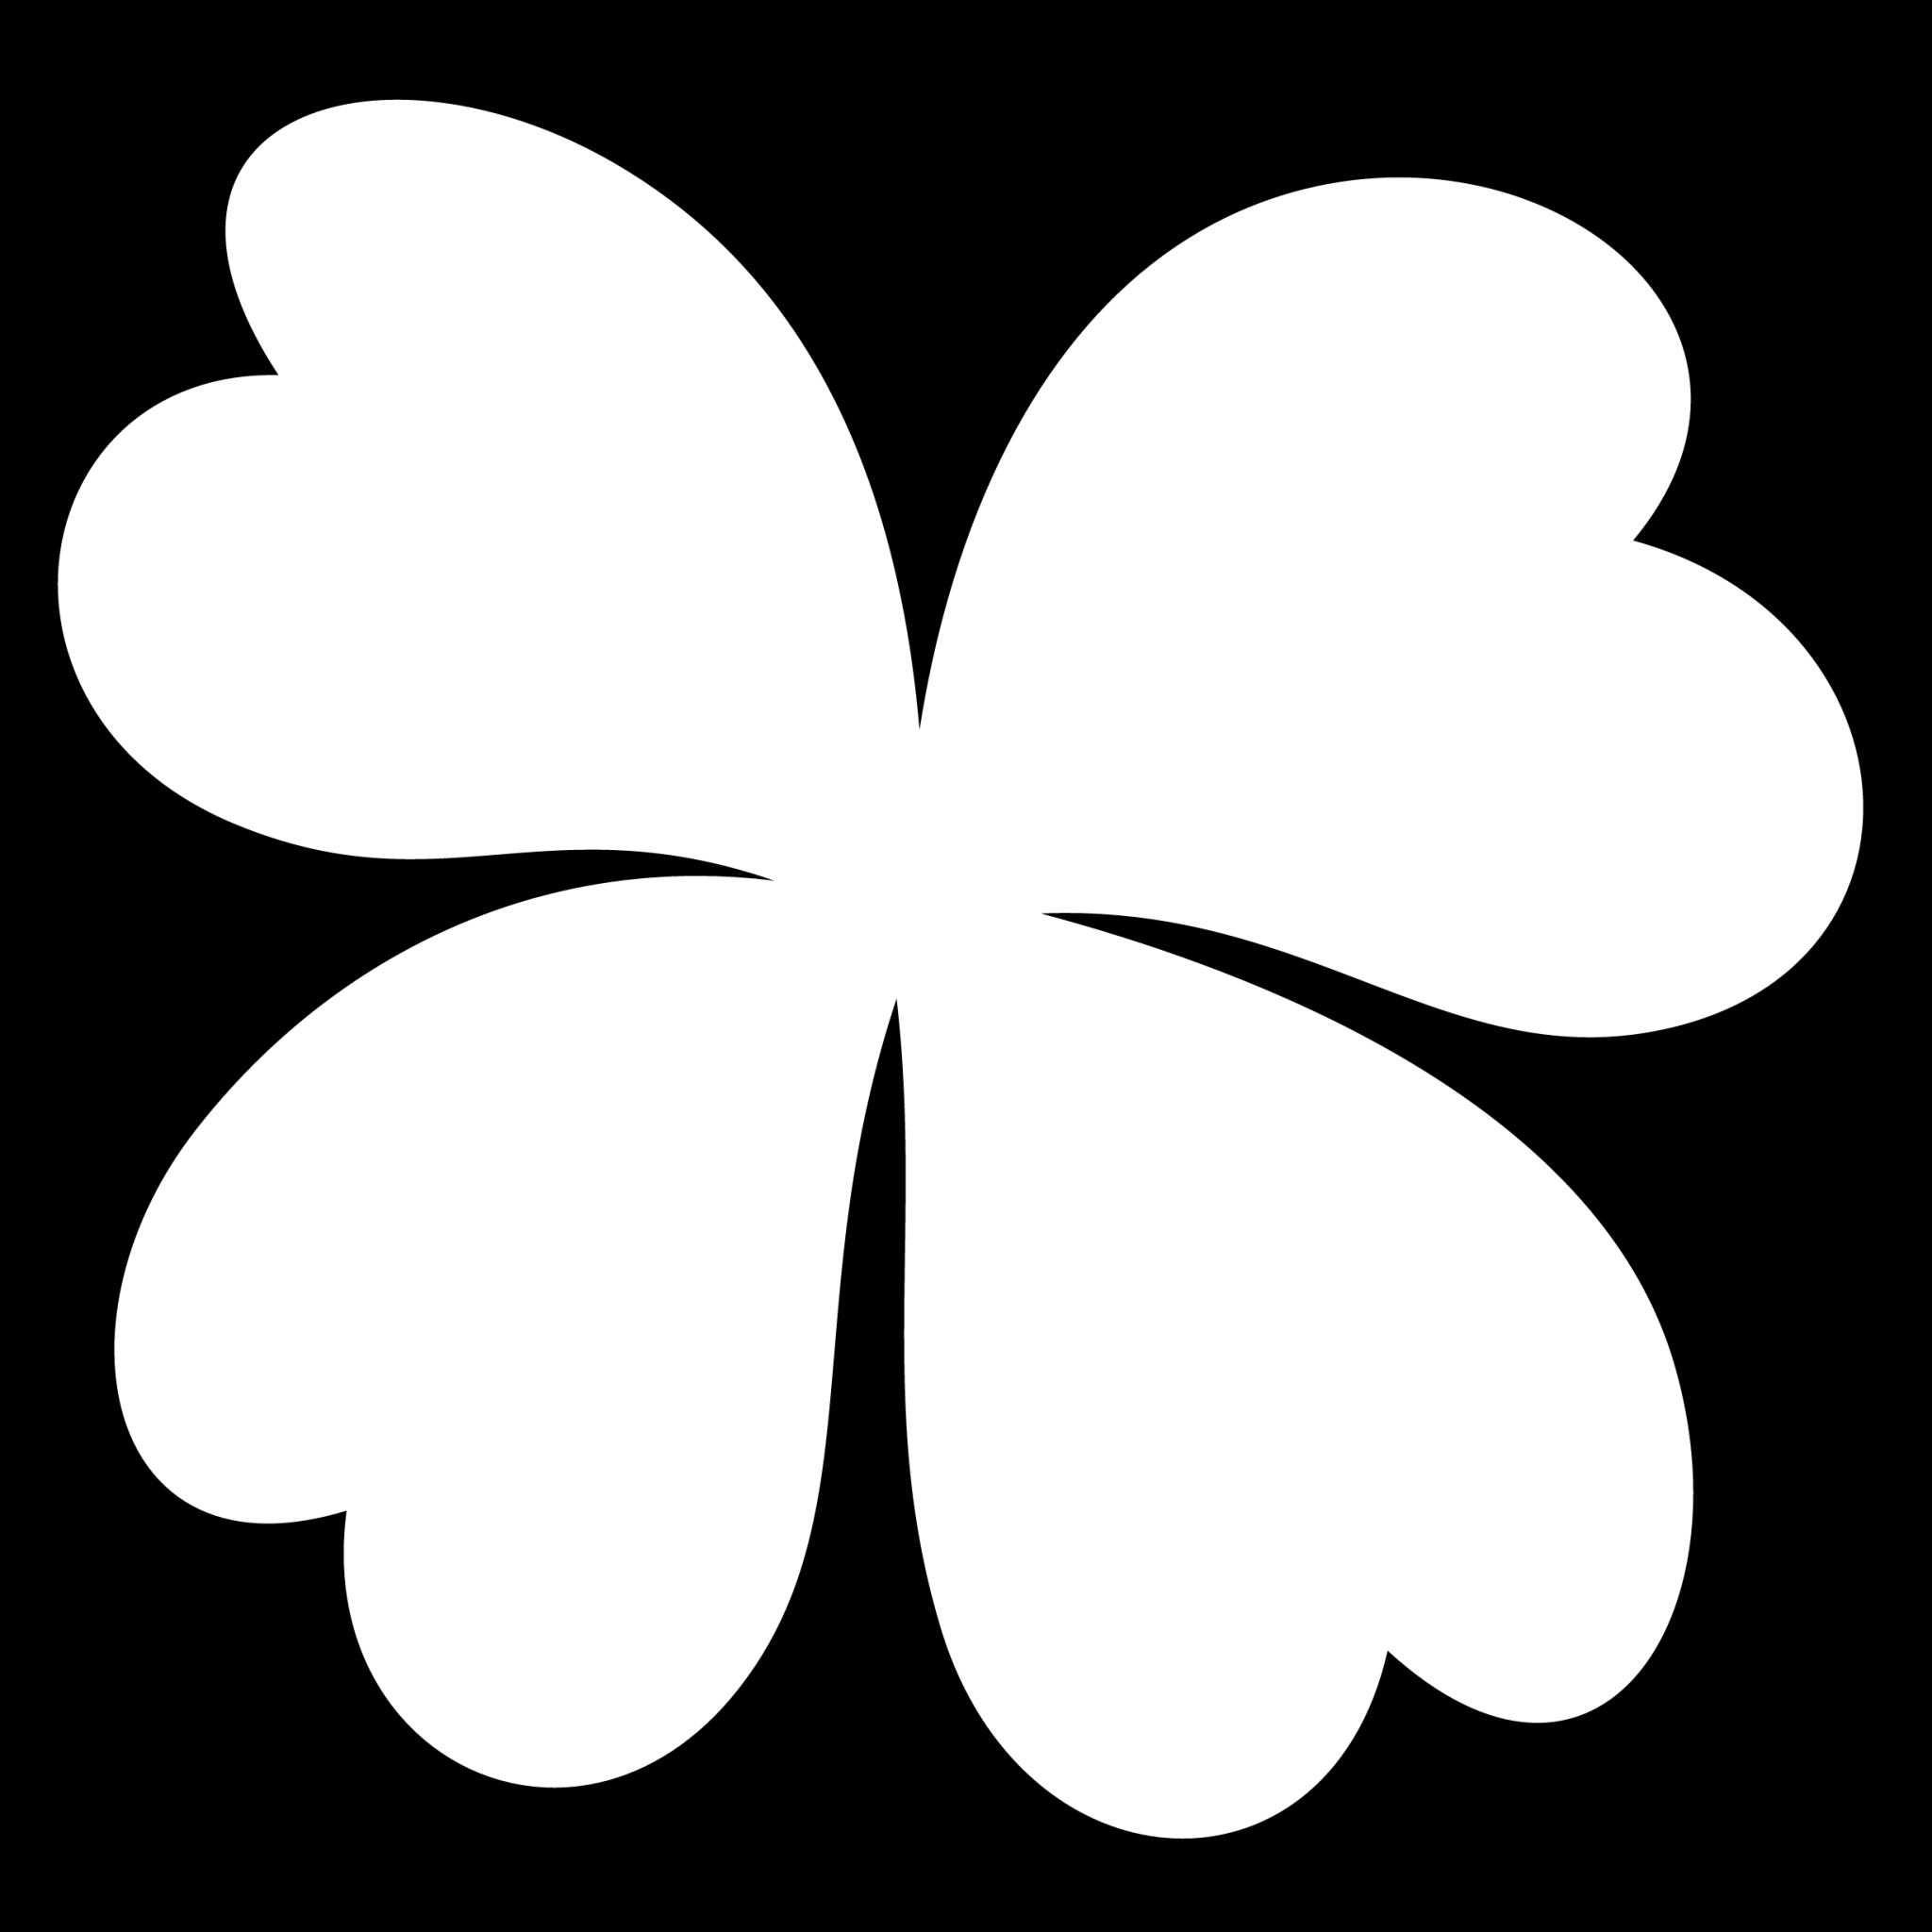 clover spiked Icon - Download for free – Iconduck